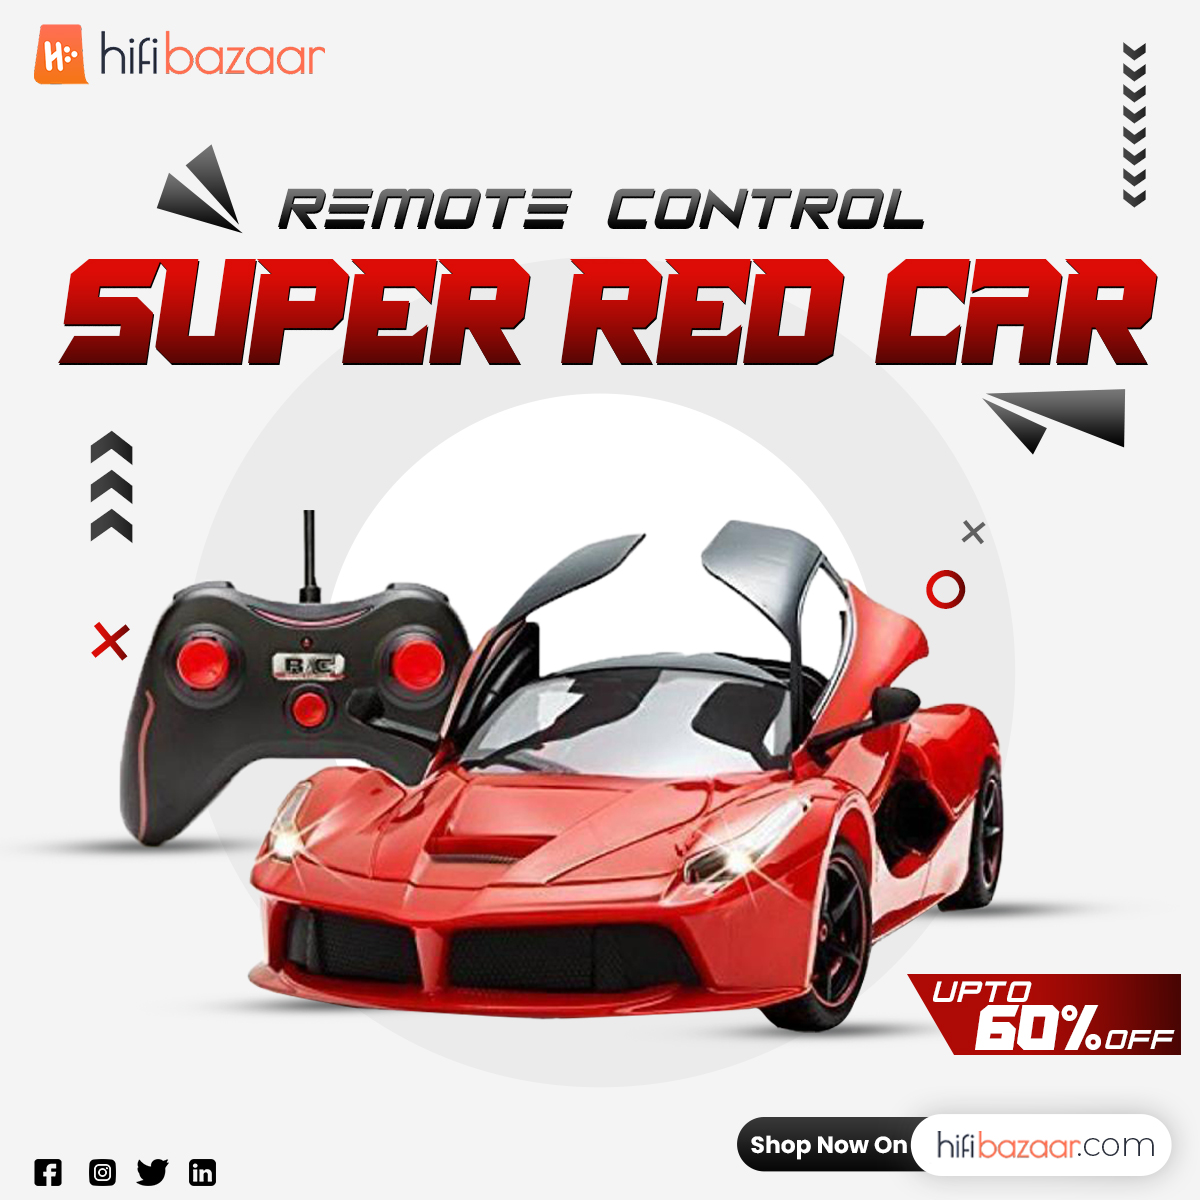 Rev Up the Fun with Remote Control Cars for Kids! 🚗💨
Buy Now:👉 t.ly/Wj8AB
.
#RemoteControlCars #RevUpTheFun #HighSpeedAdventures #EndlessEntertainment #FuelTheirImagination #GiftsForKids #ShopNow #JoyousPlaytime #AdventureAwaits #youngspeedsters #hifibazaar